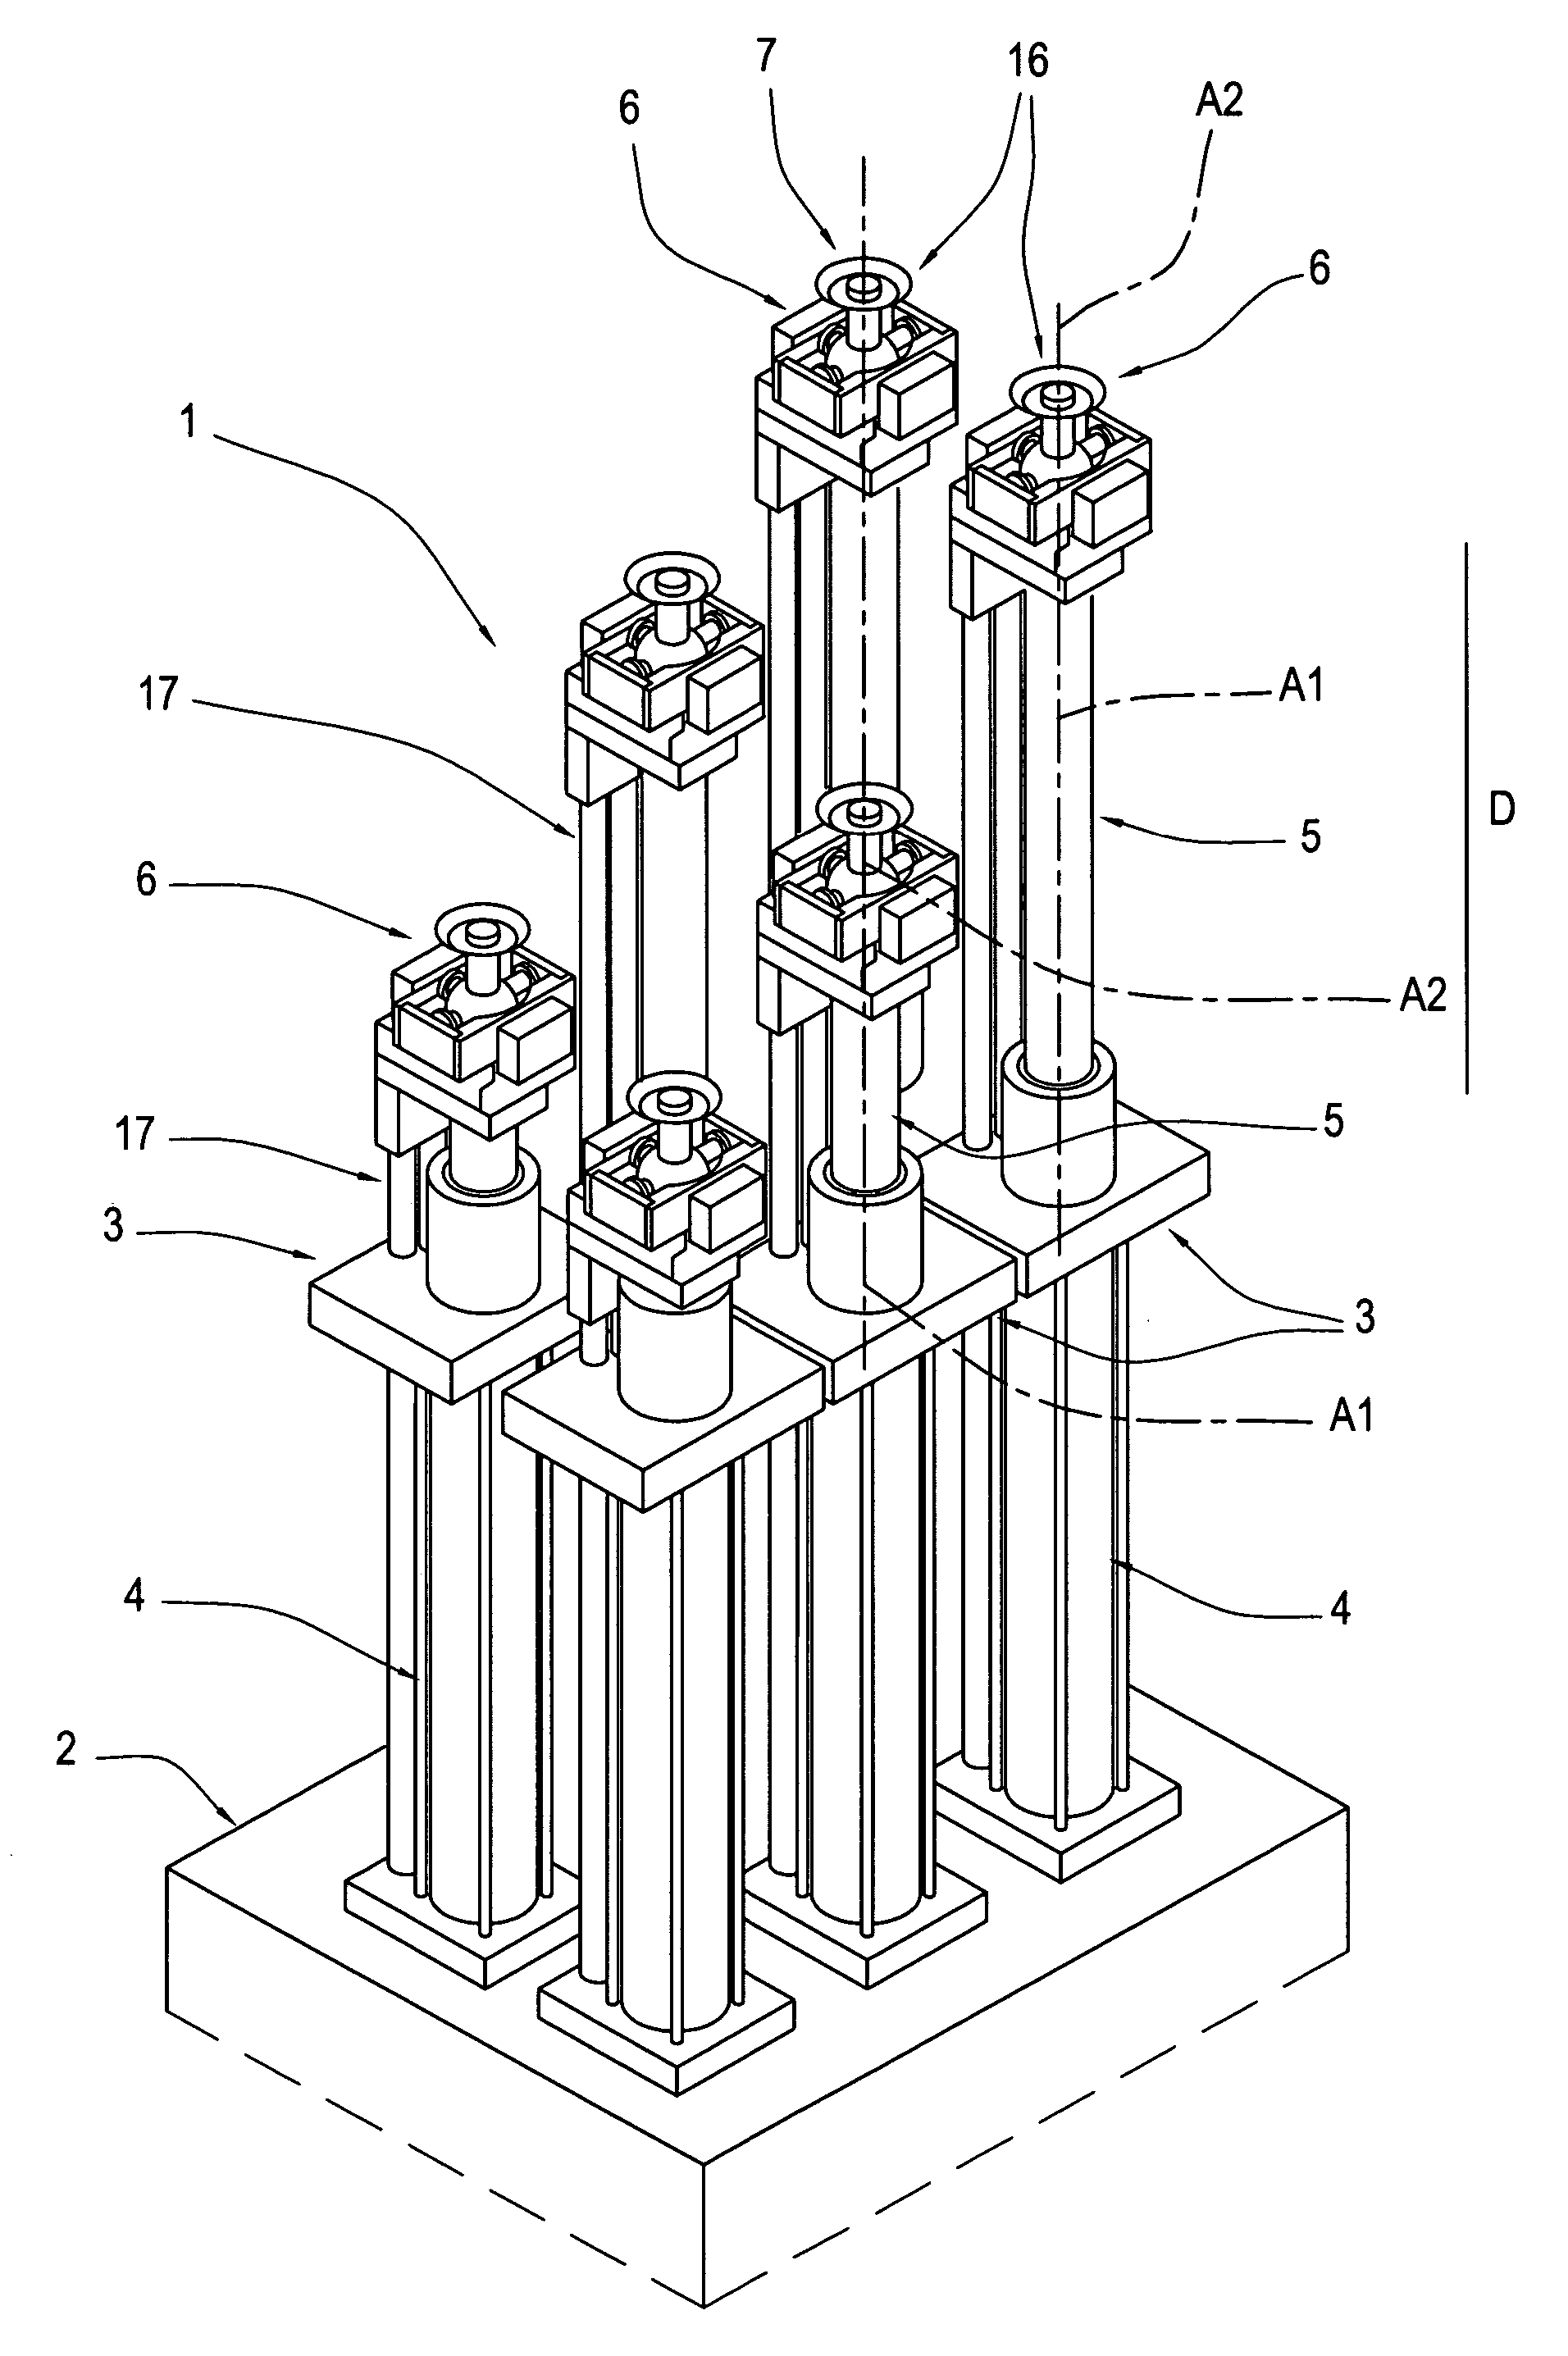 Support device for securing workpieces